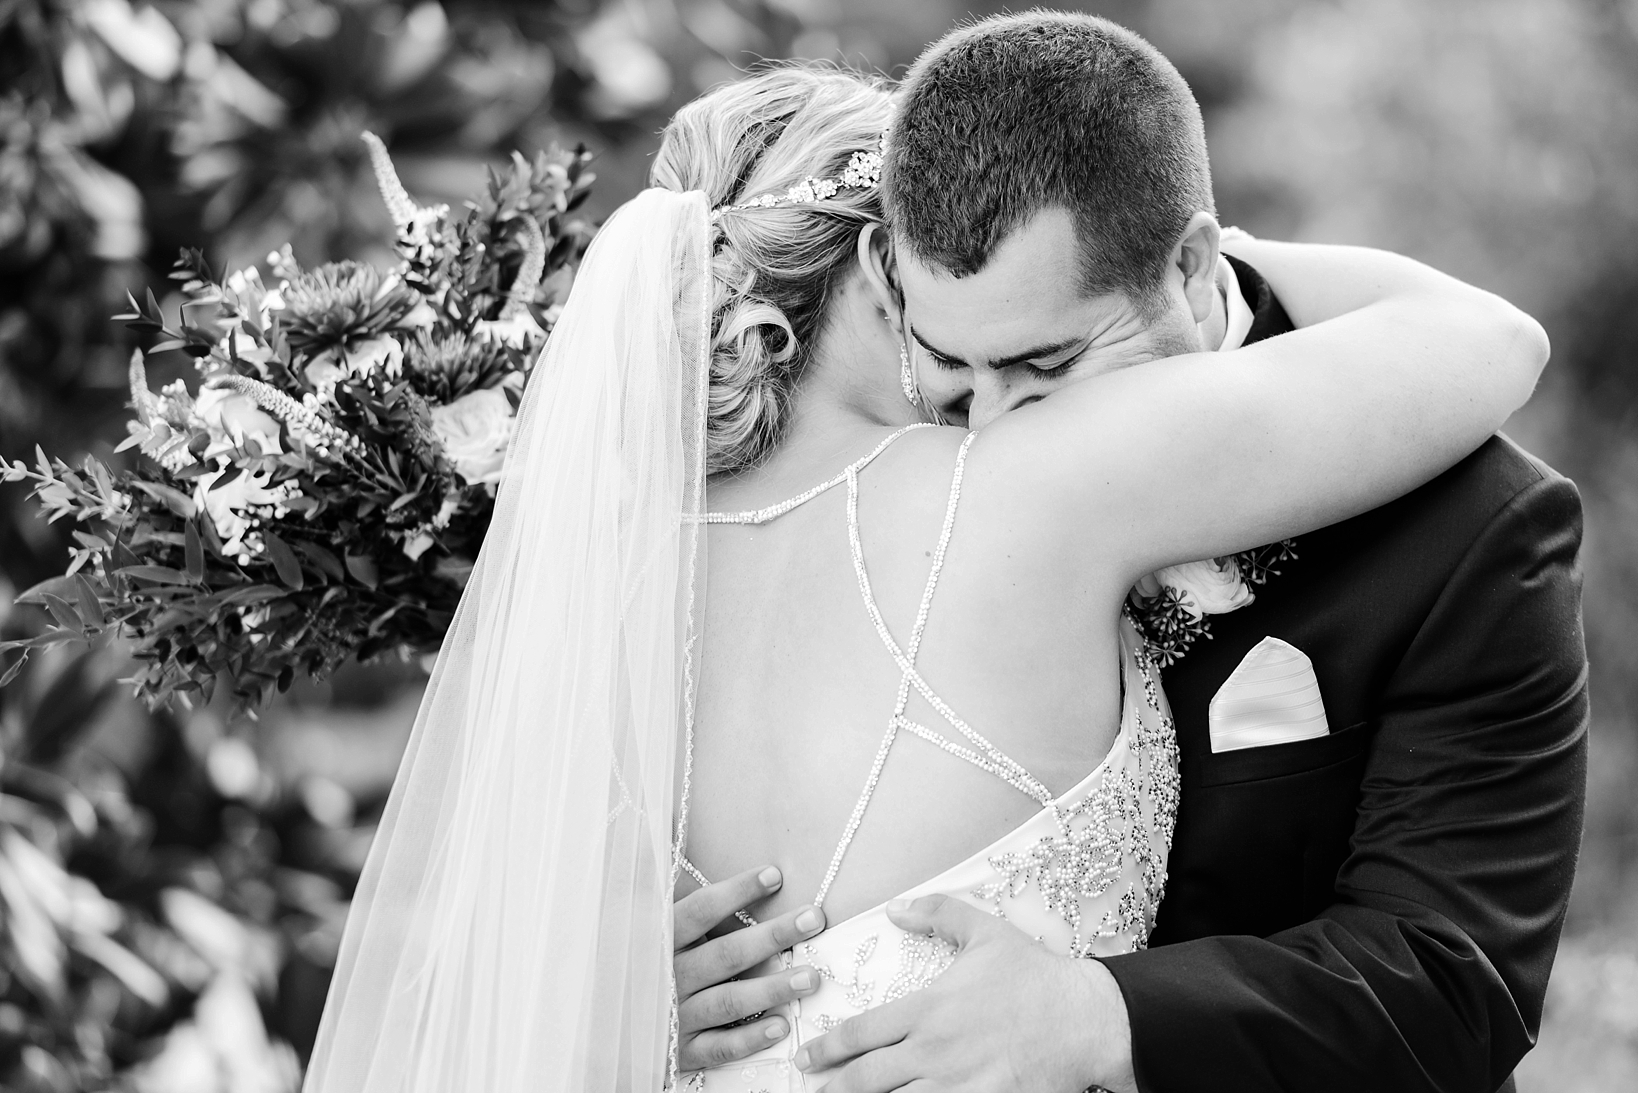 Black and White image of a bride and groom hugging on their wedding day